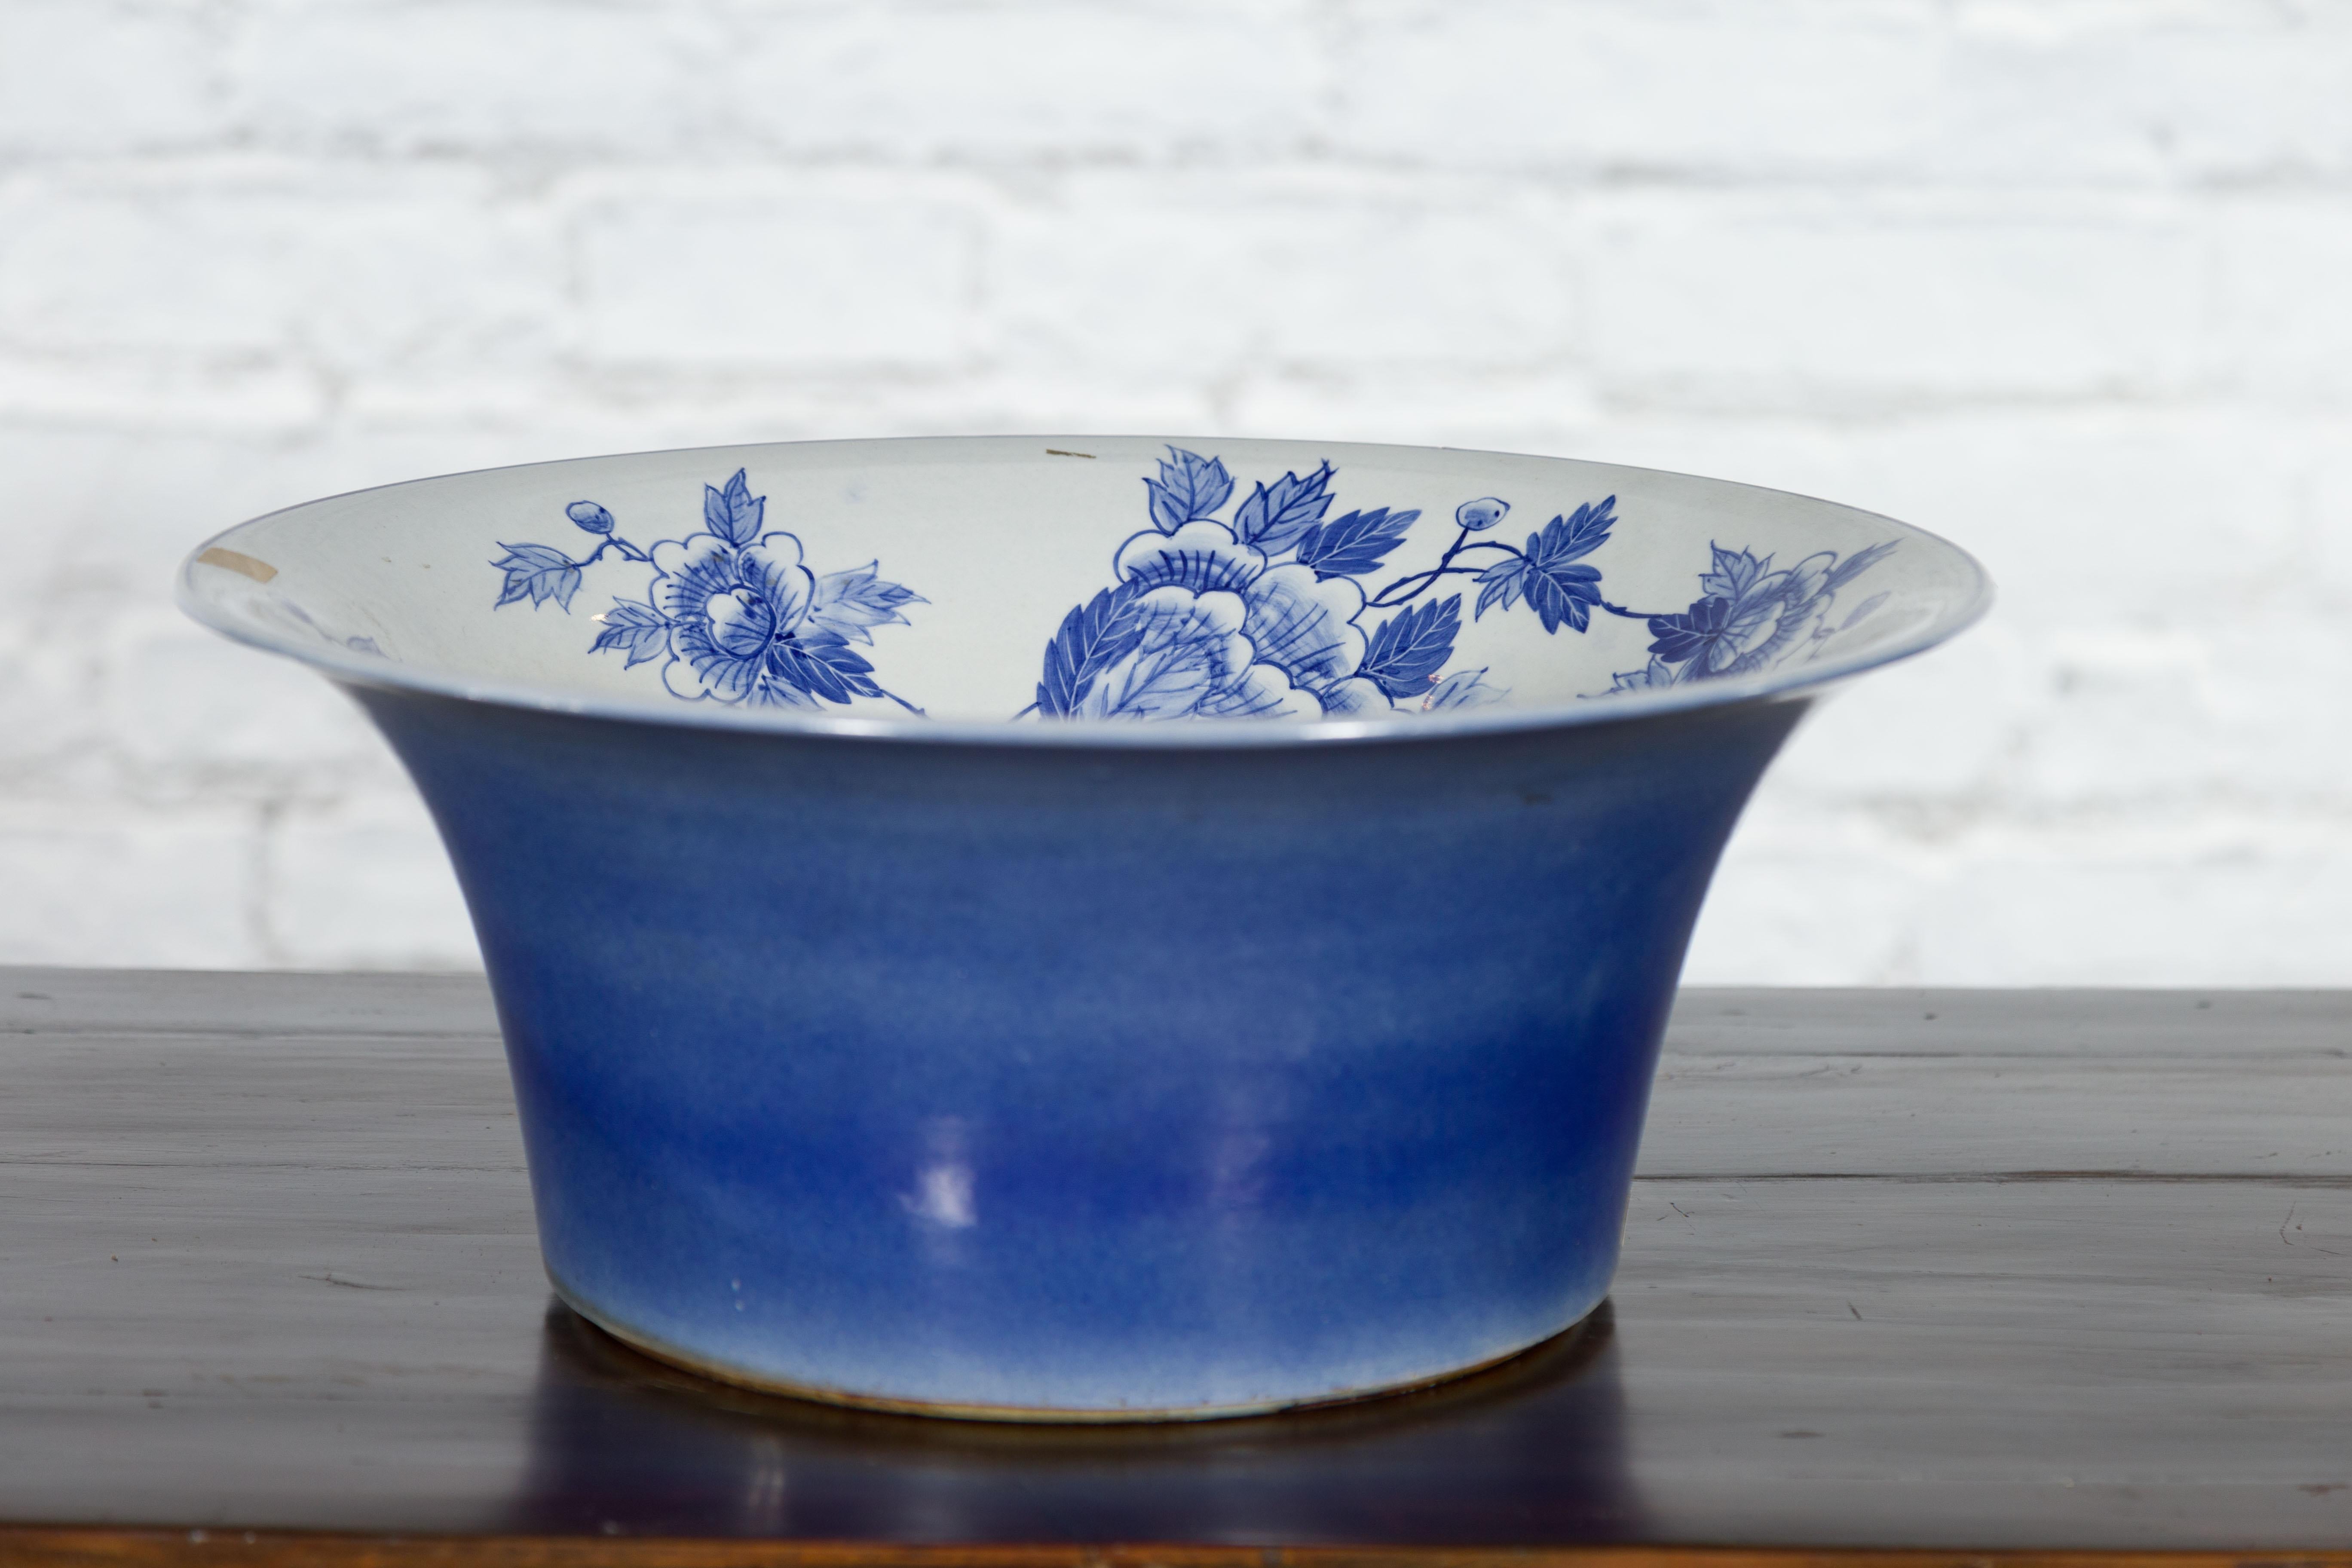 Chinese Blue and White Porcelain Wash Basin with Floral Motifs and Cobalt Blue For Sale 8